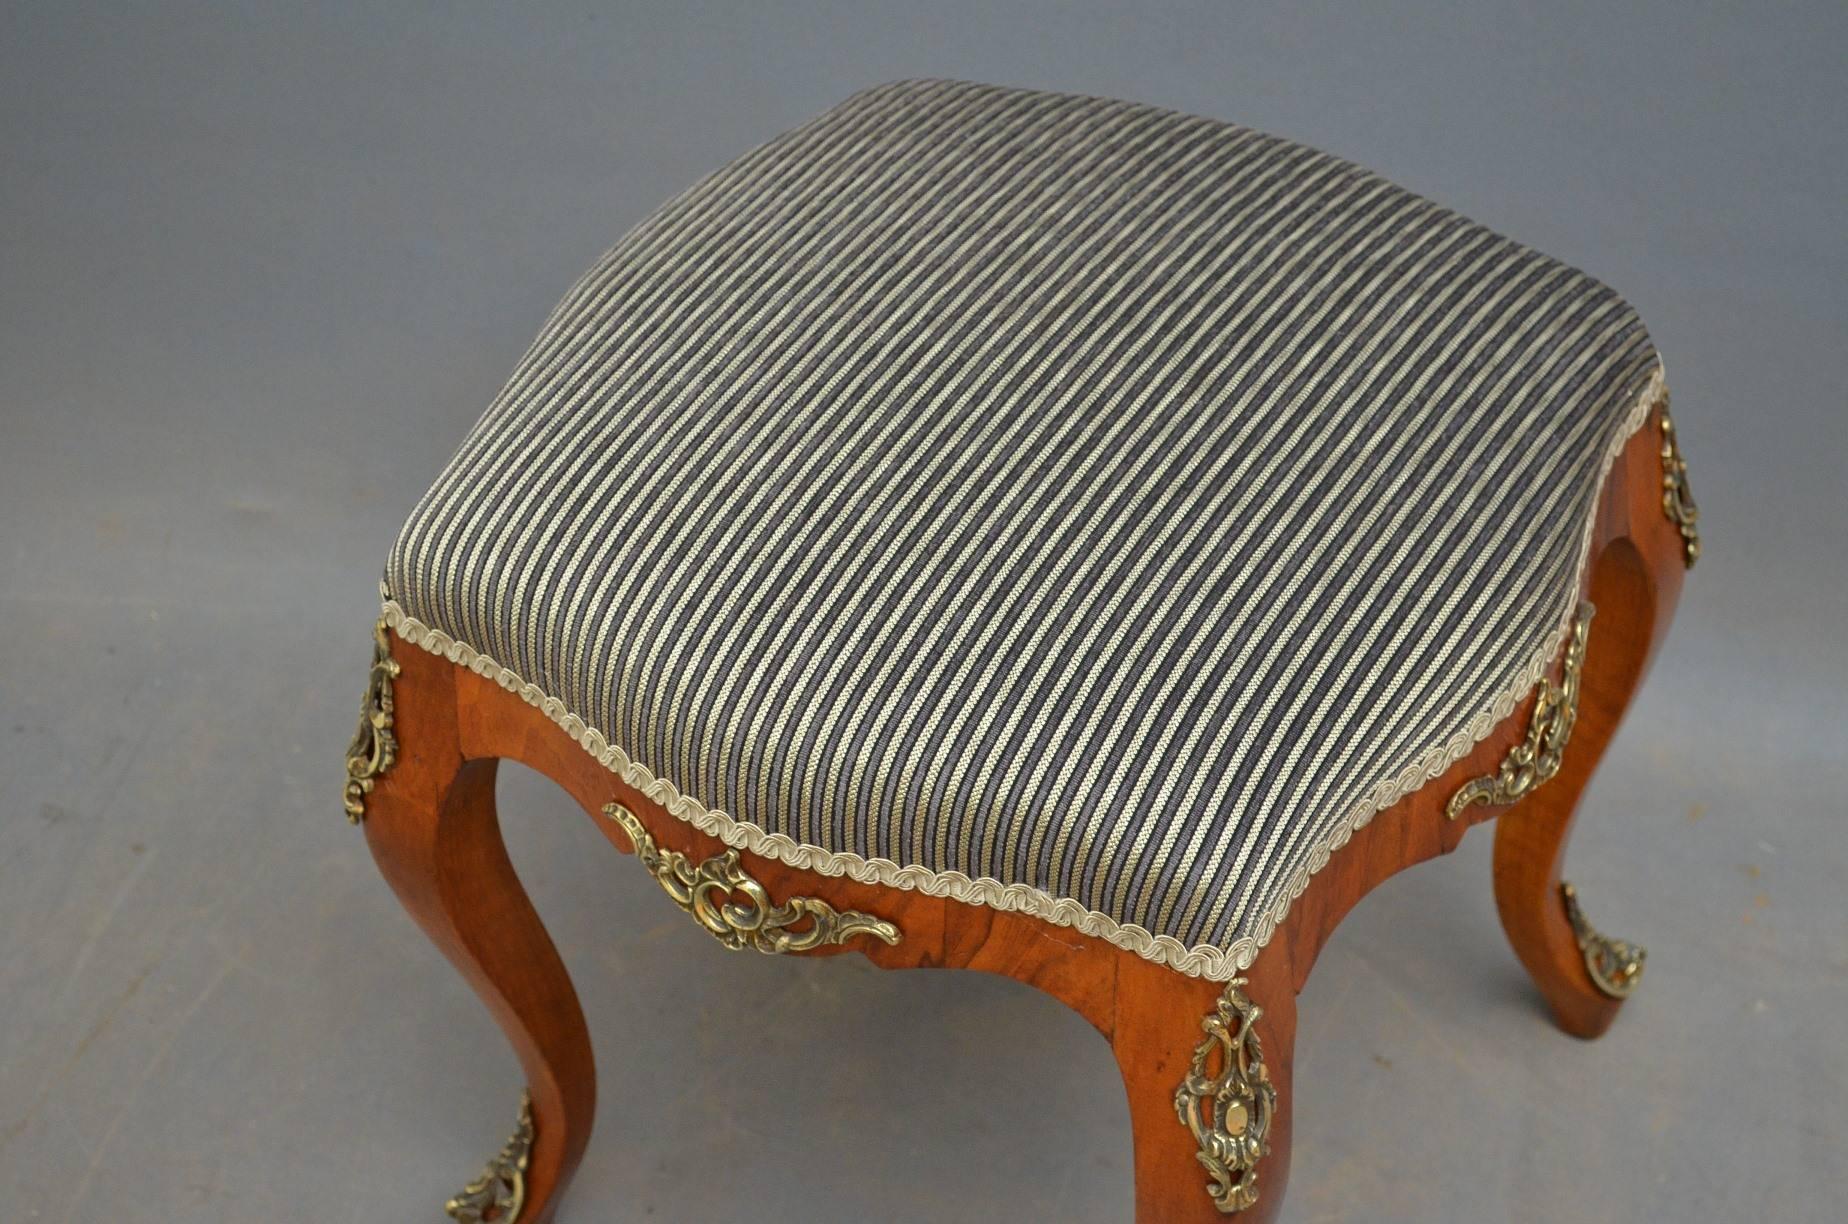 K0233 19th century French figured walnut dressing stool, having serpentine seat with contemporary fabric and four cabriole legs, all with original ormolu decoration throughout, ready to place at home, circa 1870
Measures: H 17